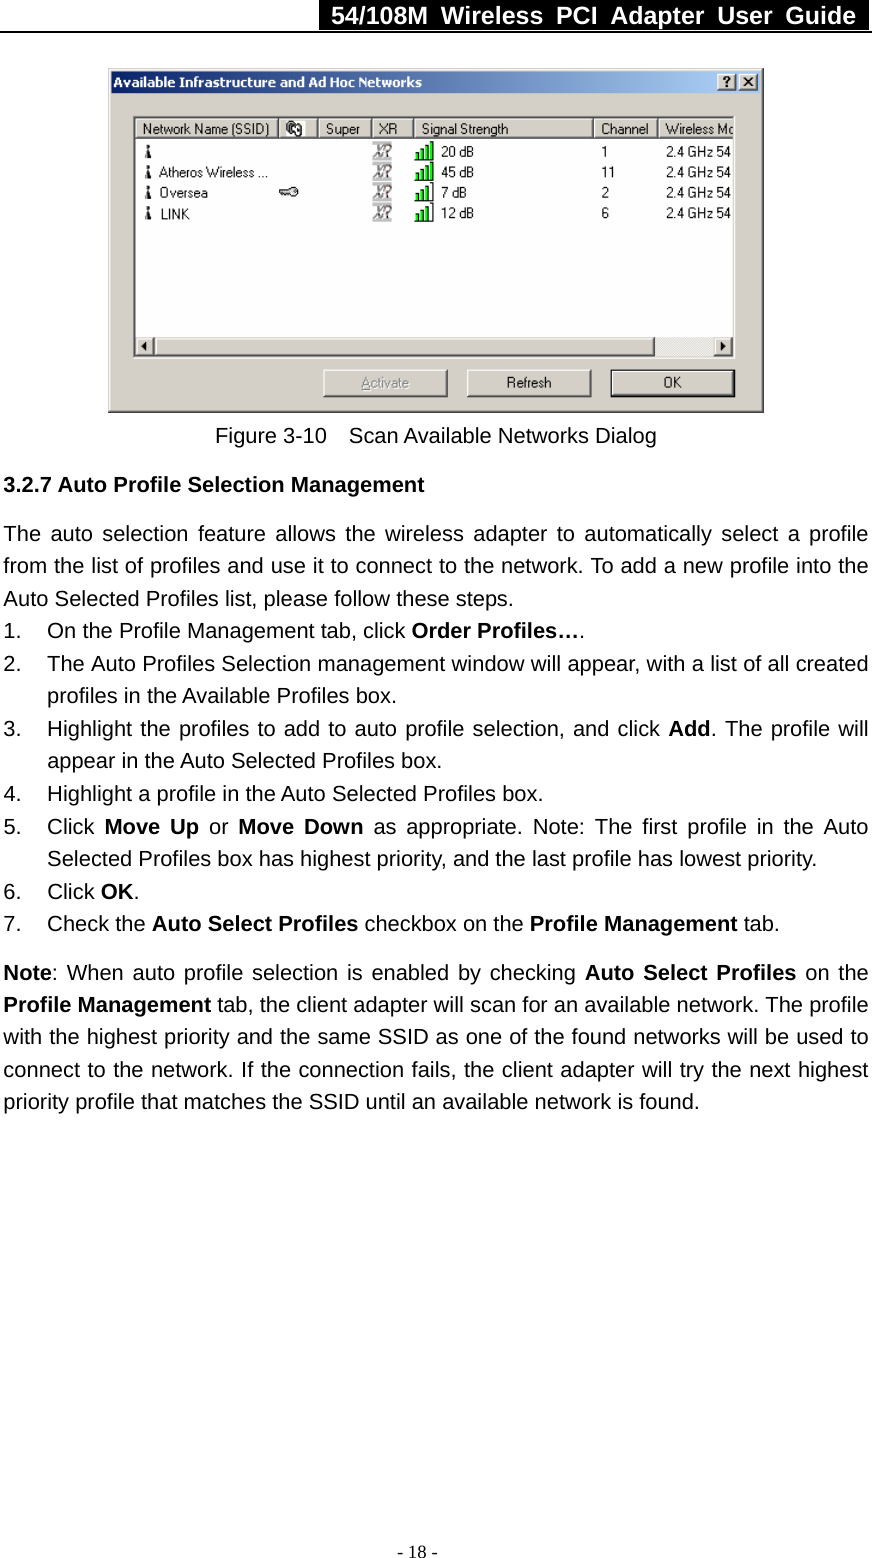   54/108M Wireless PCI Adapter User Guide  - 18 -  Figure 3-10    Scan Available Networks Dialog 3.2.7 Auto Profile Selection Management The auto selection feature allows the wireless adapter to automatically select a profile from the list of profiles and use it to connect to the network. To add a new profile into the Auto Selected Profiles list, please follow these steps. 1.  On the Profile Management tab, click Order Profiles…. 2.  The Auto Profiles Selection management window will appear, with a list of all created profiles in the Available Profiles box. 3.  Highlight the profiles to add to auto profile selection, and click Add. The profile will appear in the Auto Selected Profiles box. 4.  Highlight a profile in the Auto Selected Profiles box. 5. Click Move Up or Move Down as appropriate. Note: The first profile in the Auto Selected Profiles box has highest priority, and the last profile has lowest priority. 6. Click OK. 7. Check the Auto Select Profiles checkbox on the Profile Management tab. Note: When auto profile selection is enabled by checking Auto Select Profiles on the Profile Management tab, the client adapter will scan for an available network. The profile with the highest priority and the same SSID as one of the found networks will be used to connect to the network. If the connection fails, the client adapter will try the next highest priority profile that matches the SSID until an available network is found. 